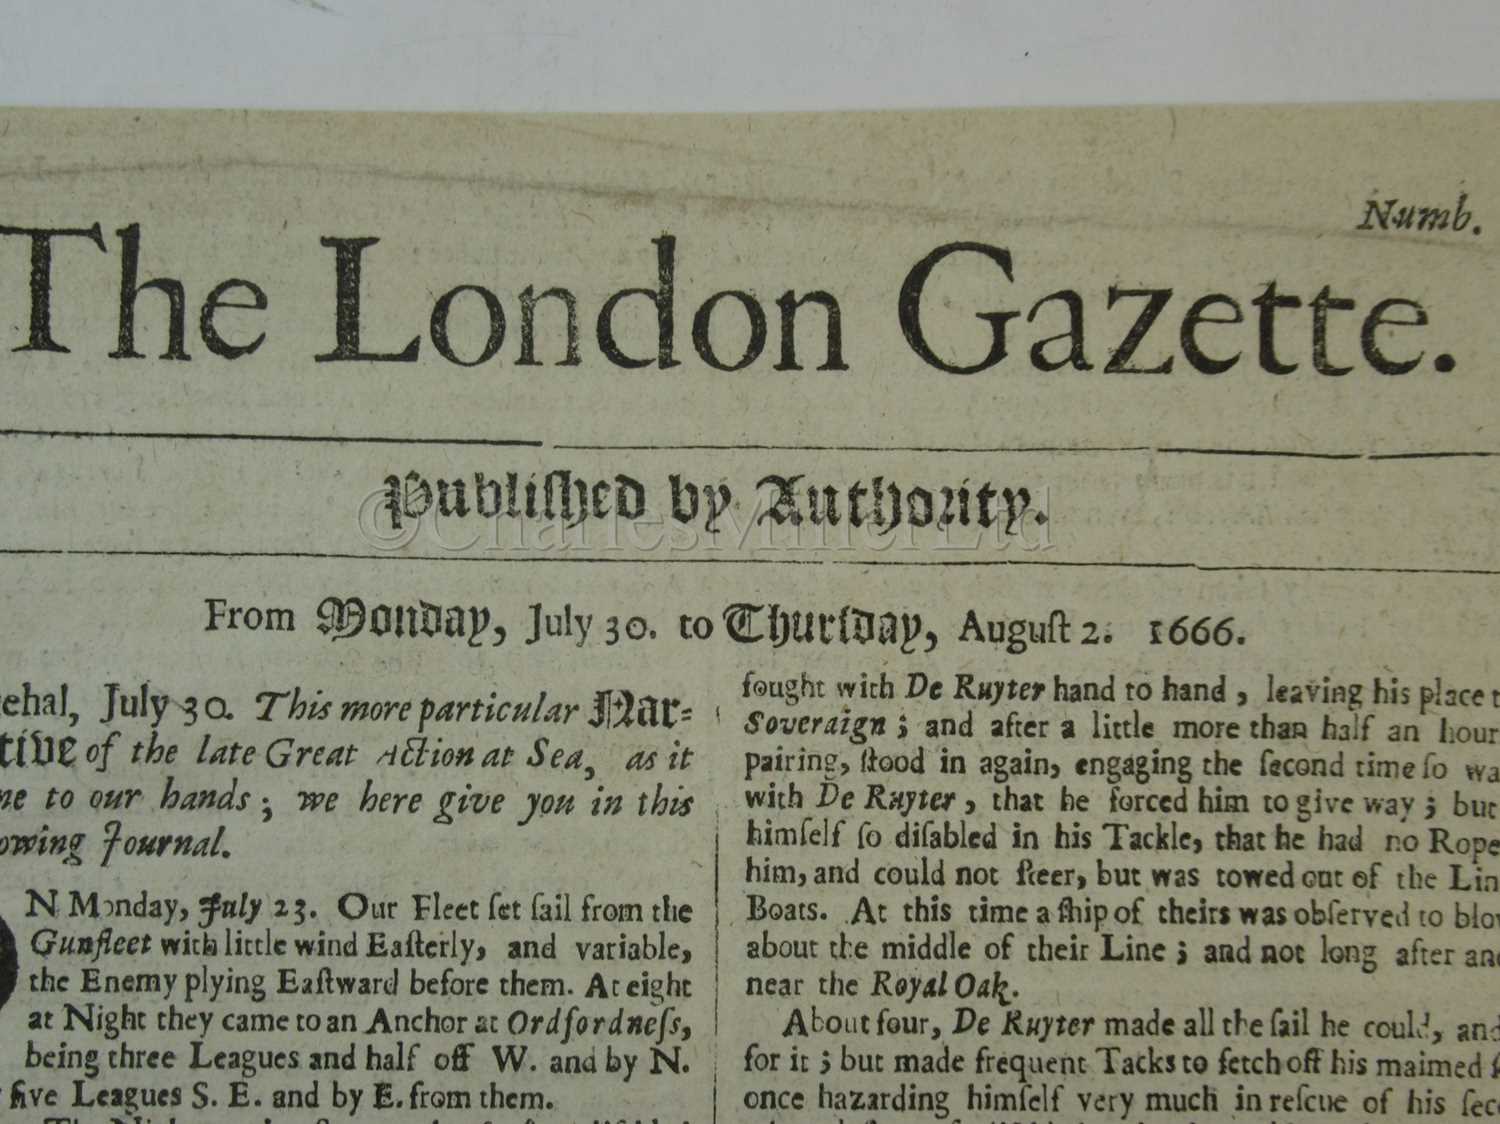 Lot 40 - THE LONDON GAZETTE: AN ACCOUNT OF THE ST JAMES'S DAY BATTLE / BATTLE OF ORFORDNESS, 4TH AUGUST 1666